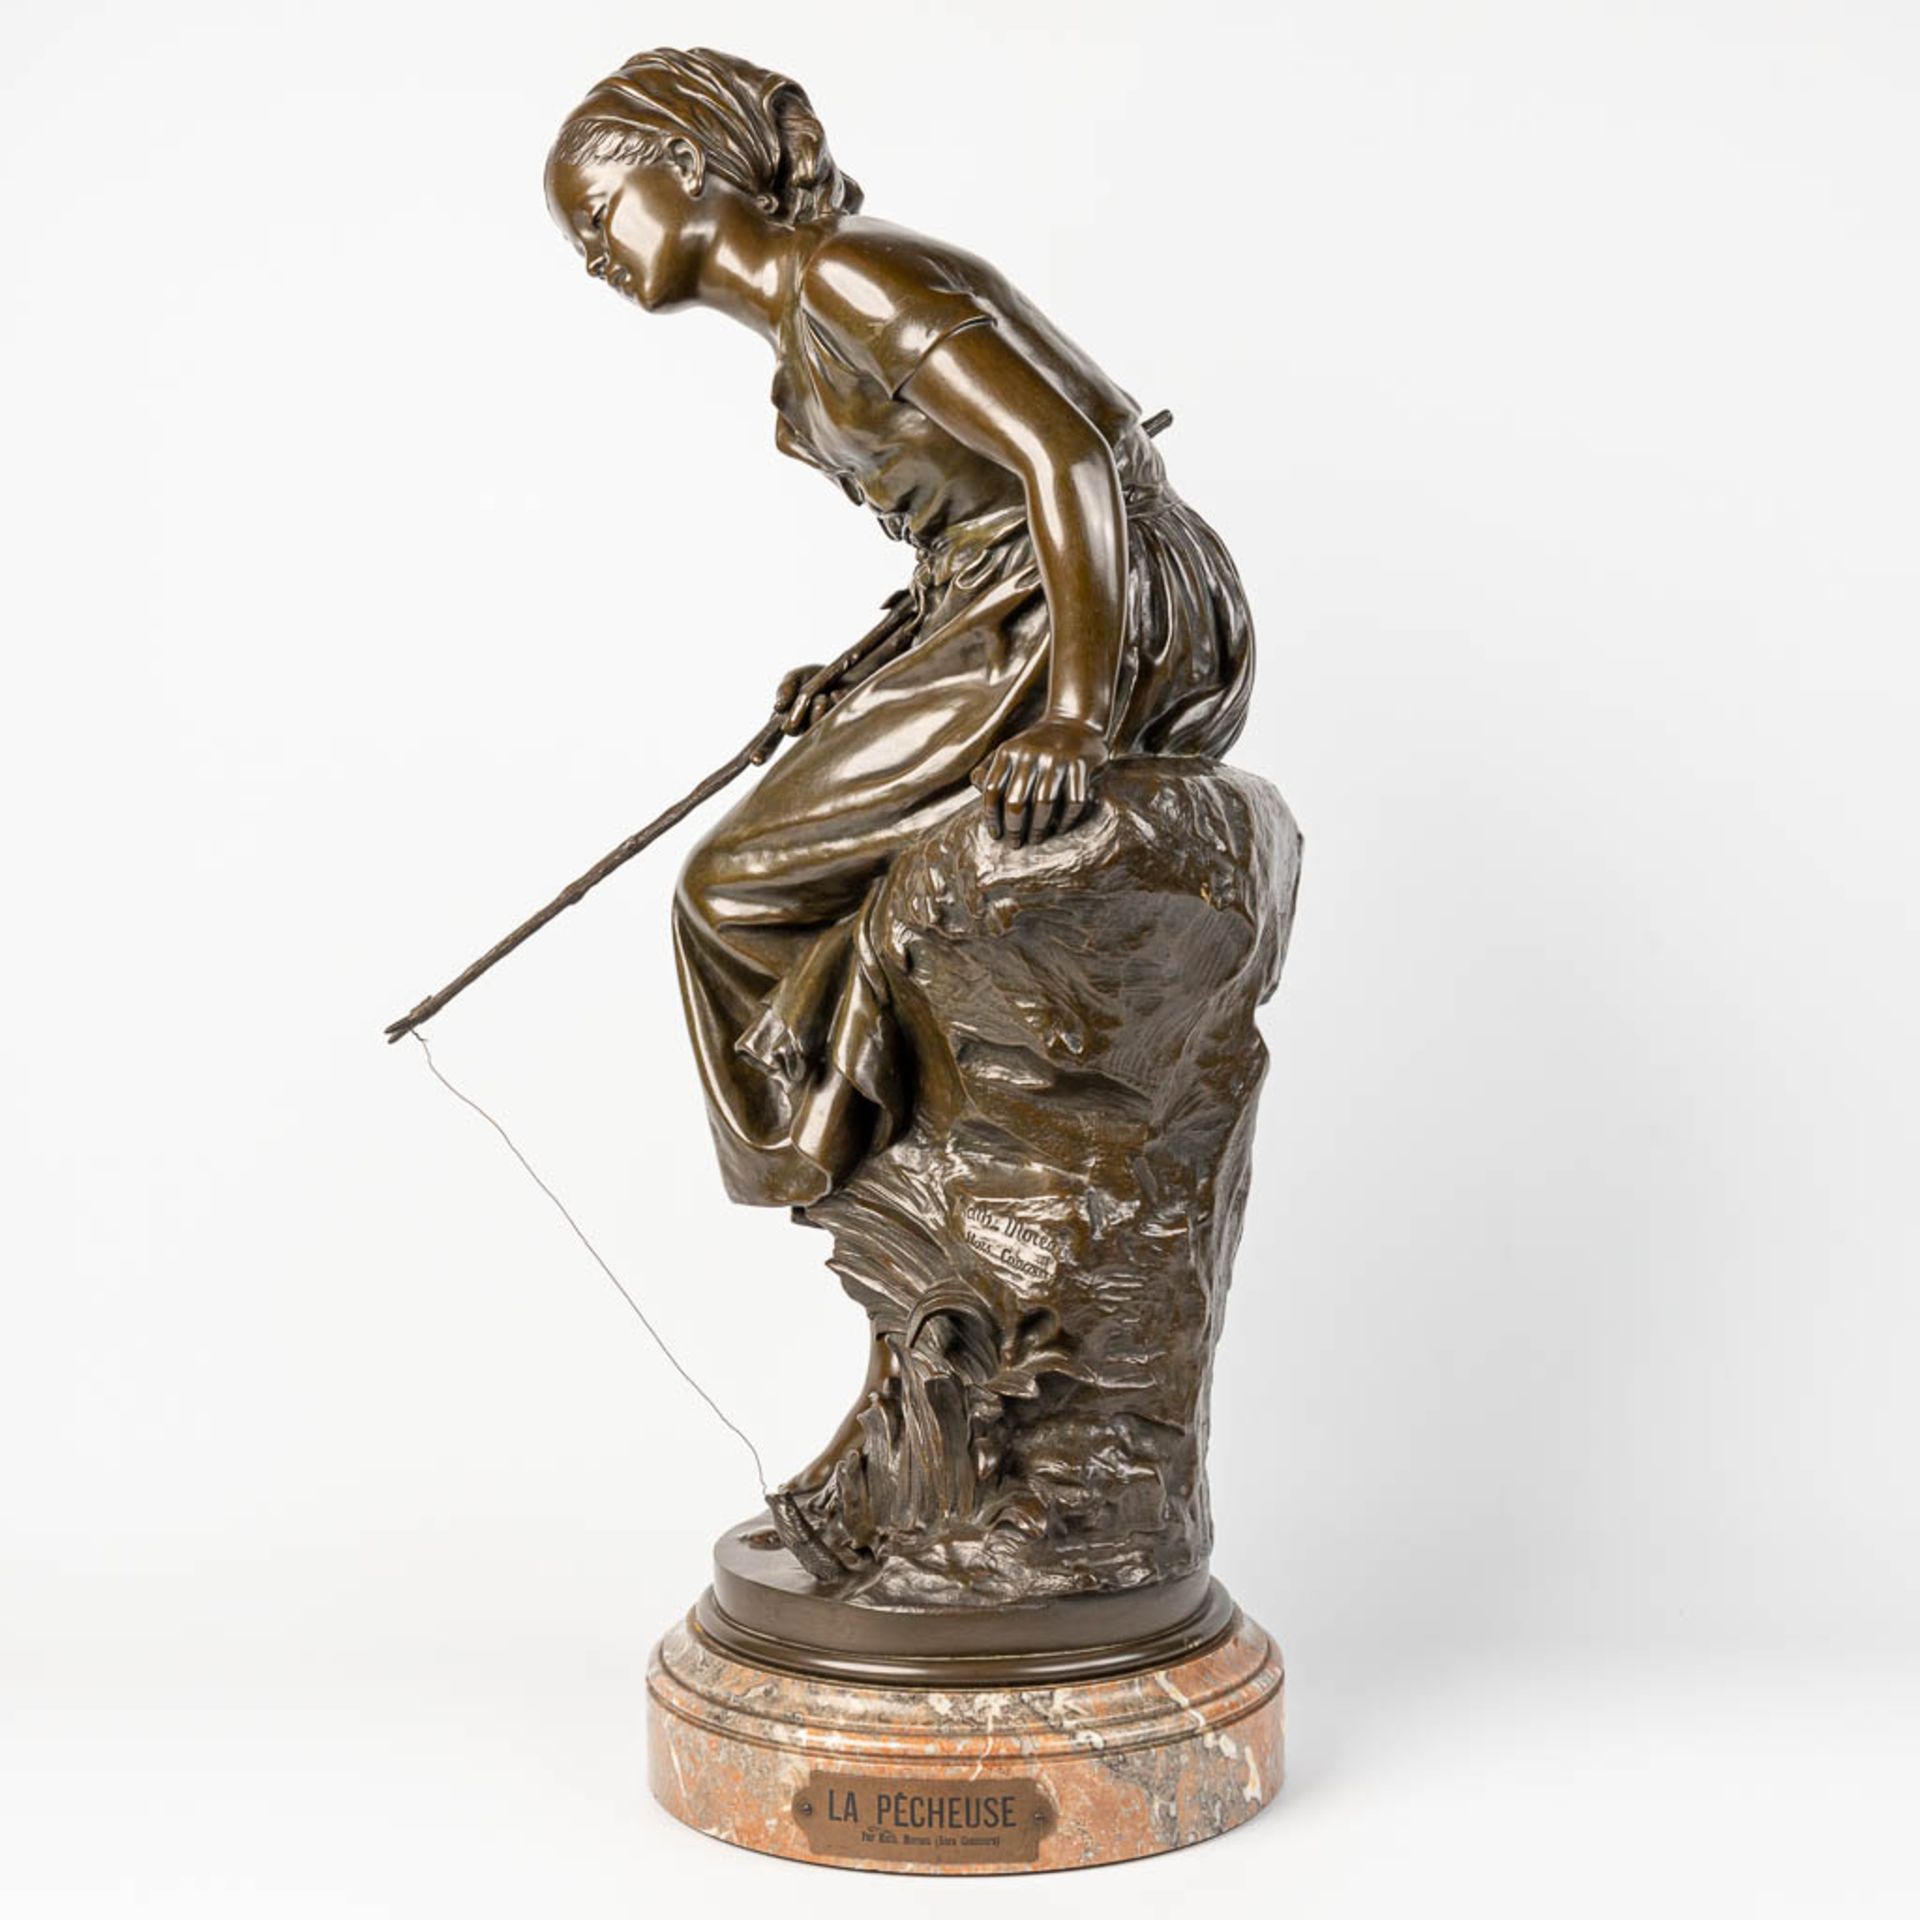 Mathurin MOREAU (1822-1912) 'La Pecheuse' a bronze statue of a fishing lady, marked Hors Concours - Image 5 of 11